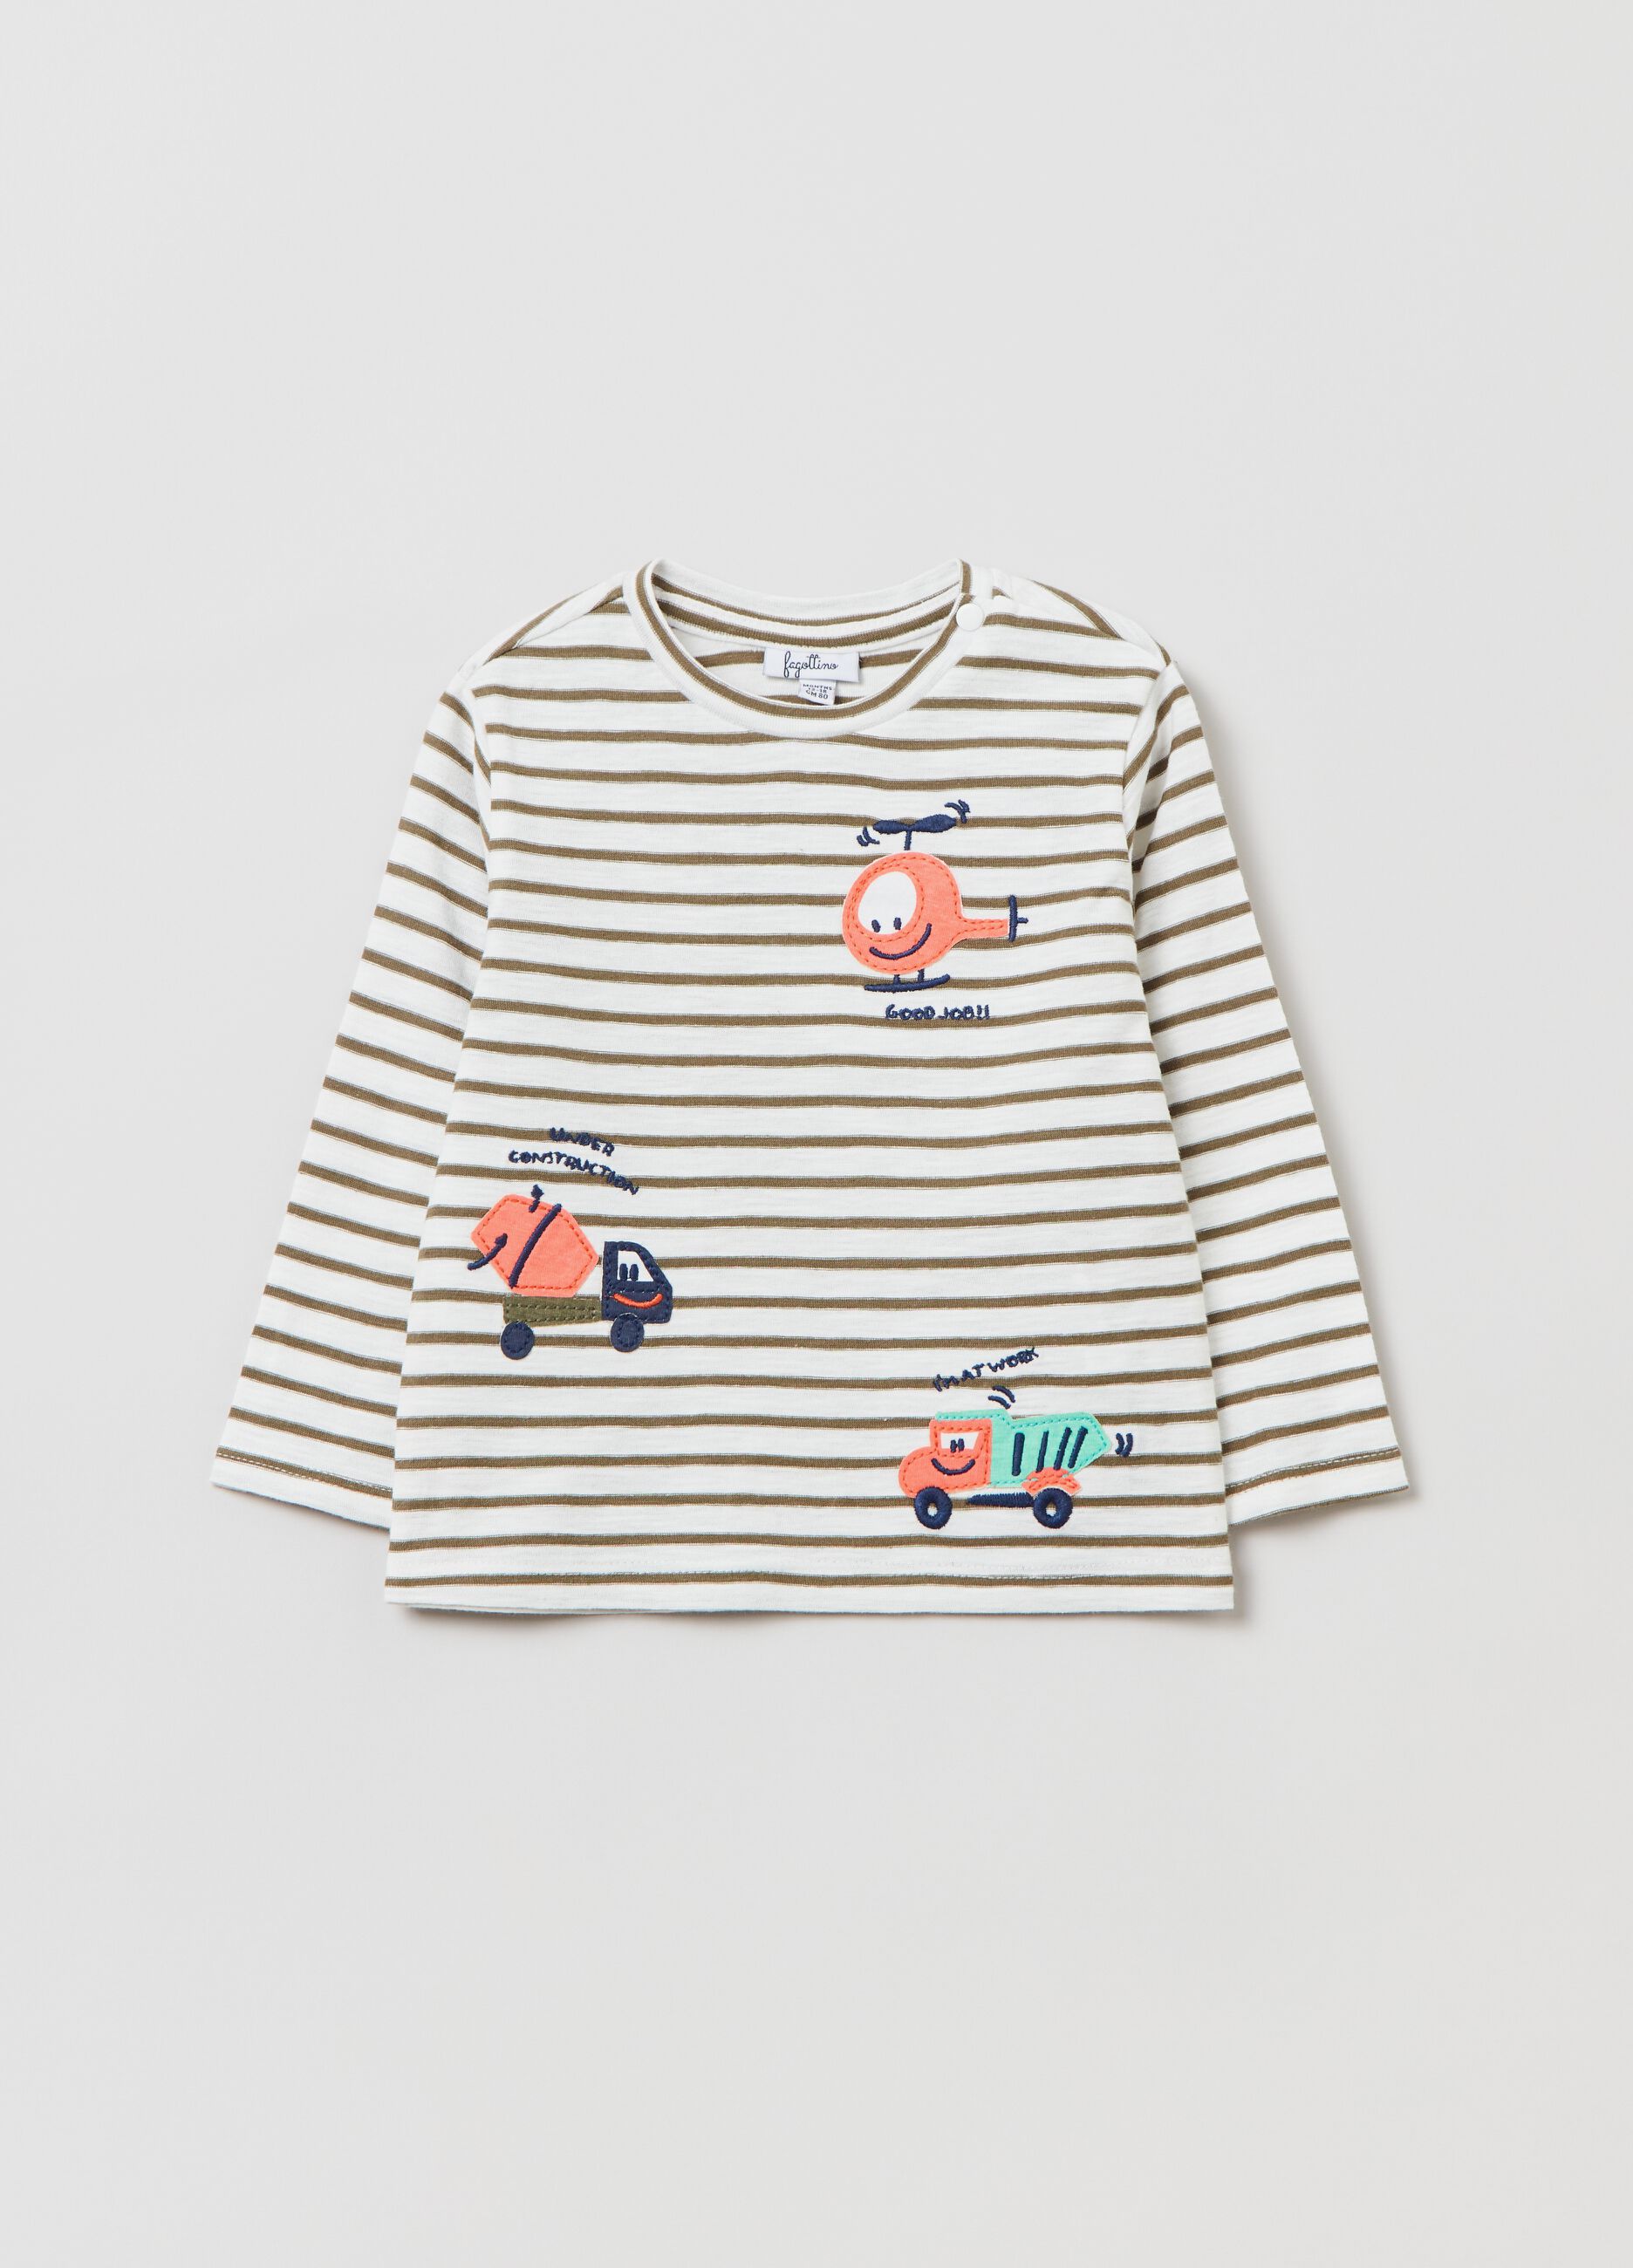 Long-sleeved T-shirt with striped pattern